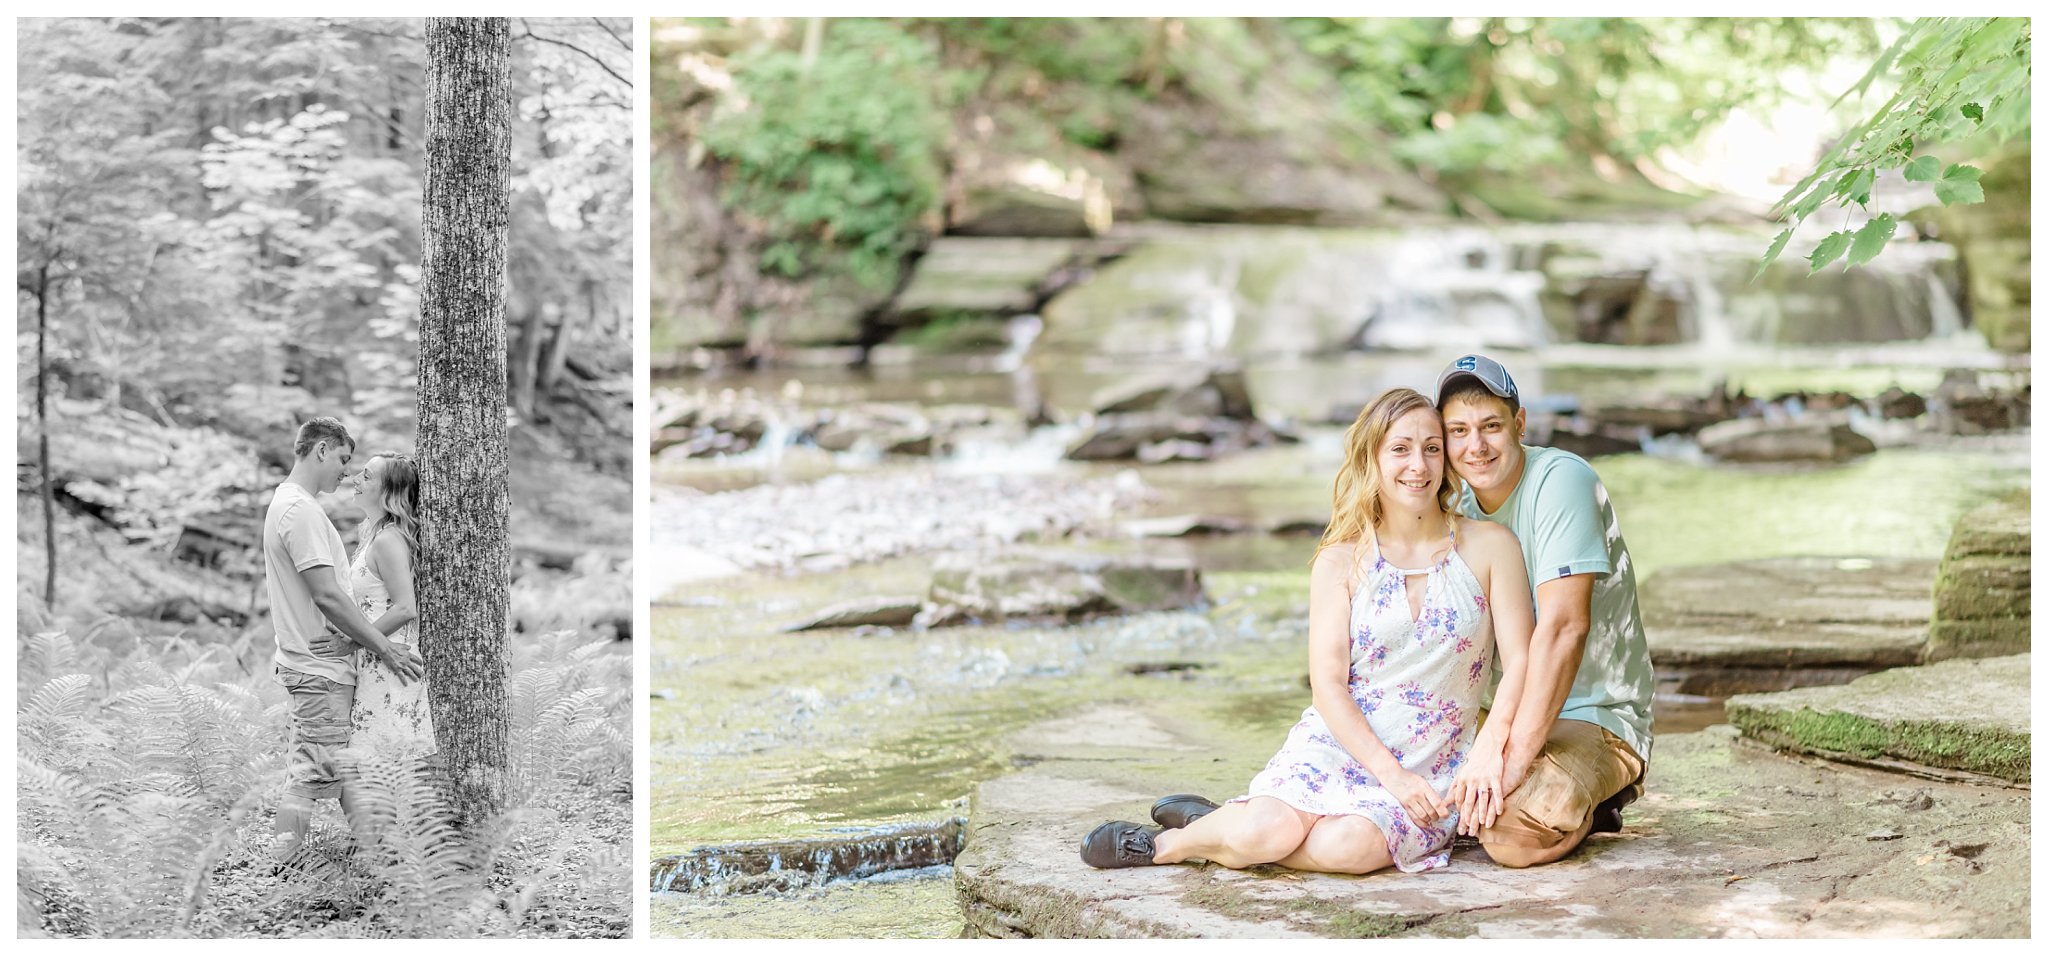 Joanna Young Photography Elizabeth and Cody Engagement Session_0011.jpg